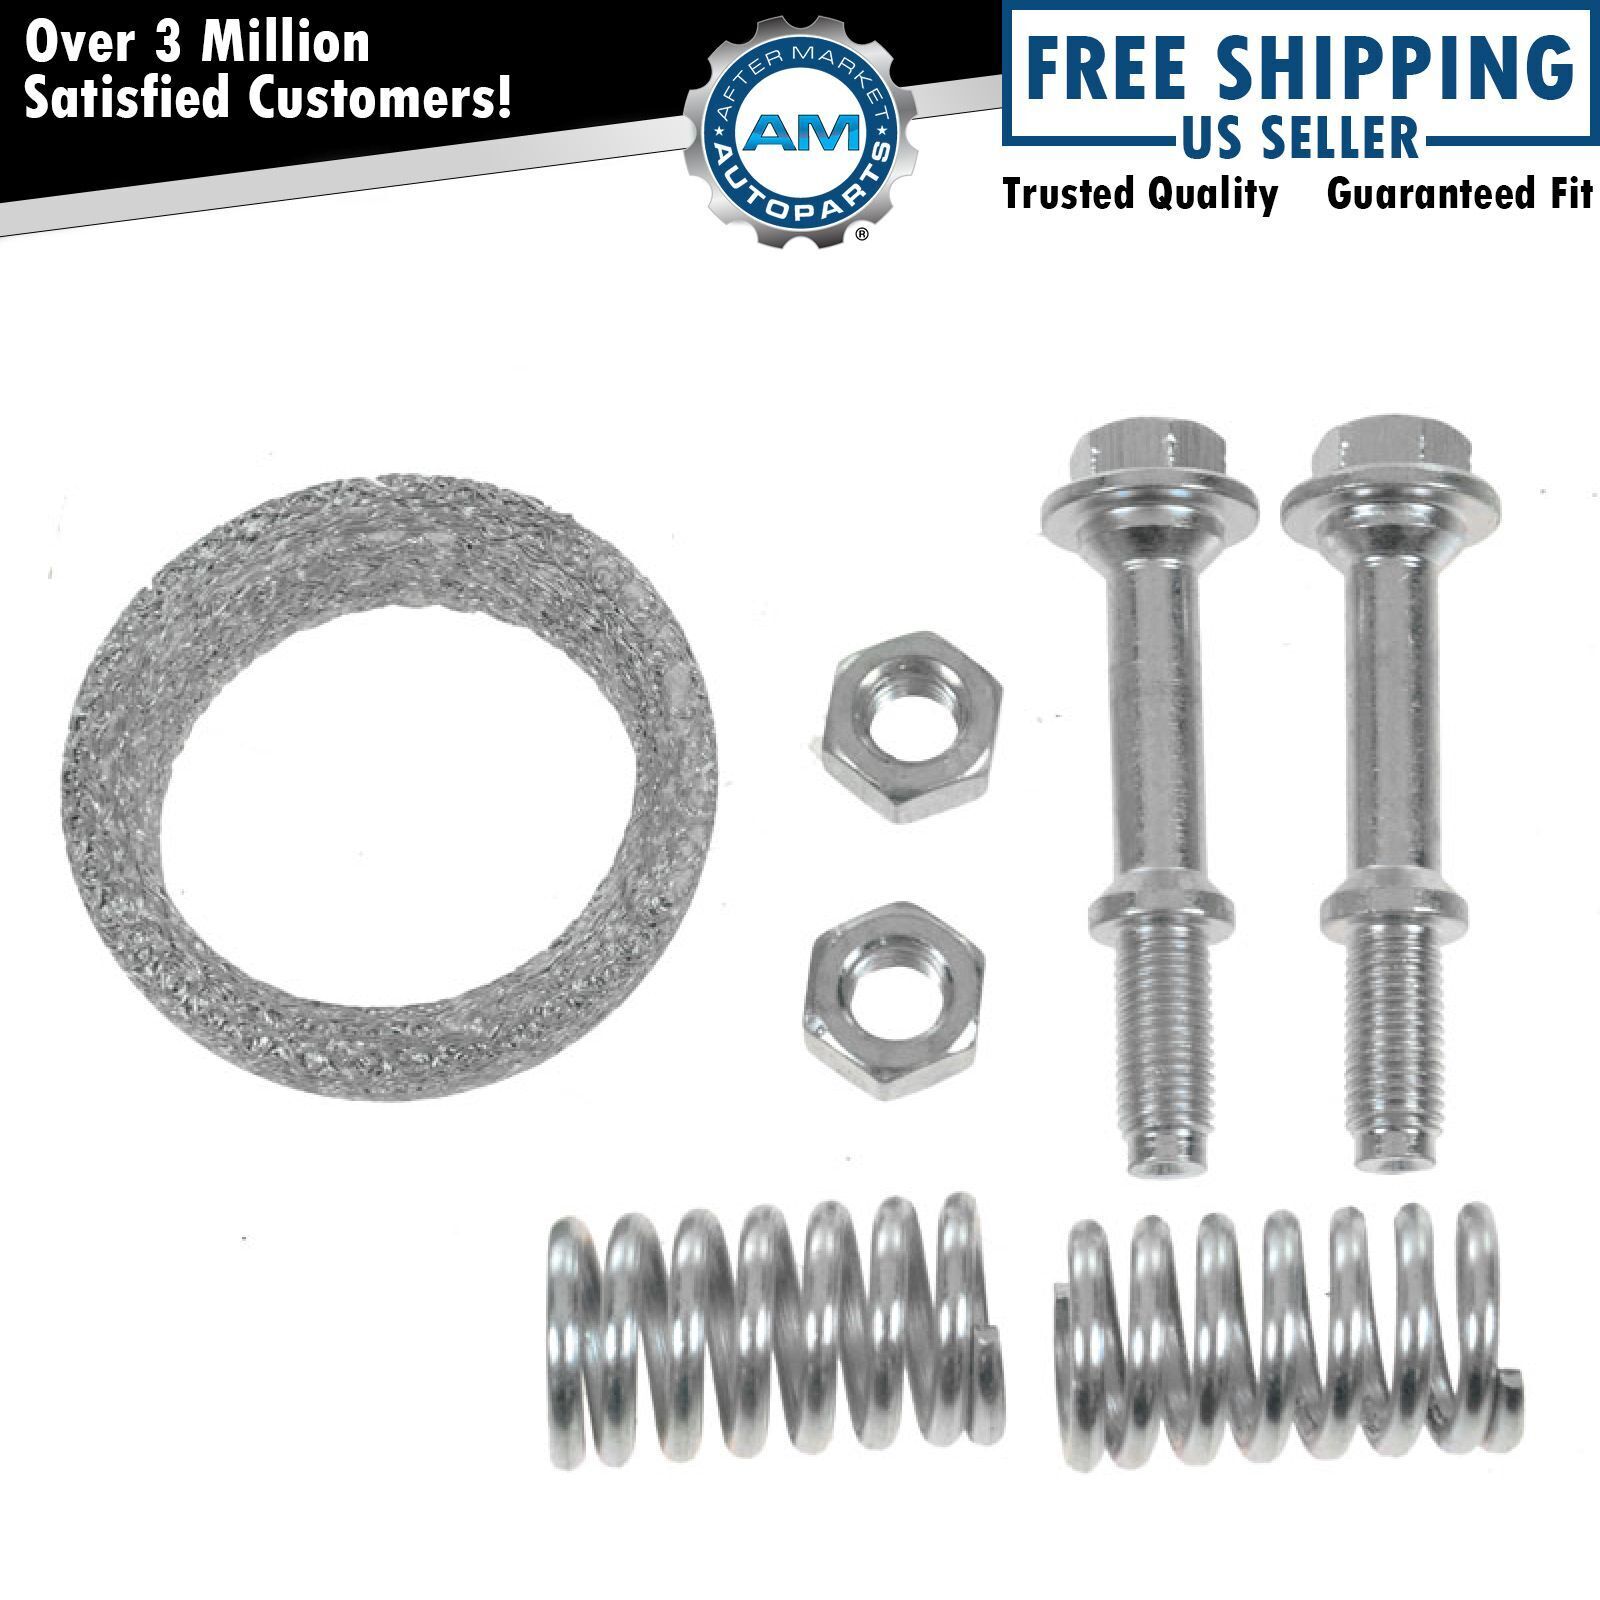 Front Exhaust Pipe Gasket & Spring Bolt Kit Set for 98-01 Prizm Toyota Corolla